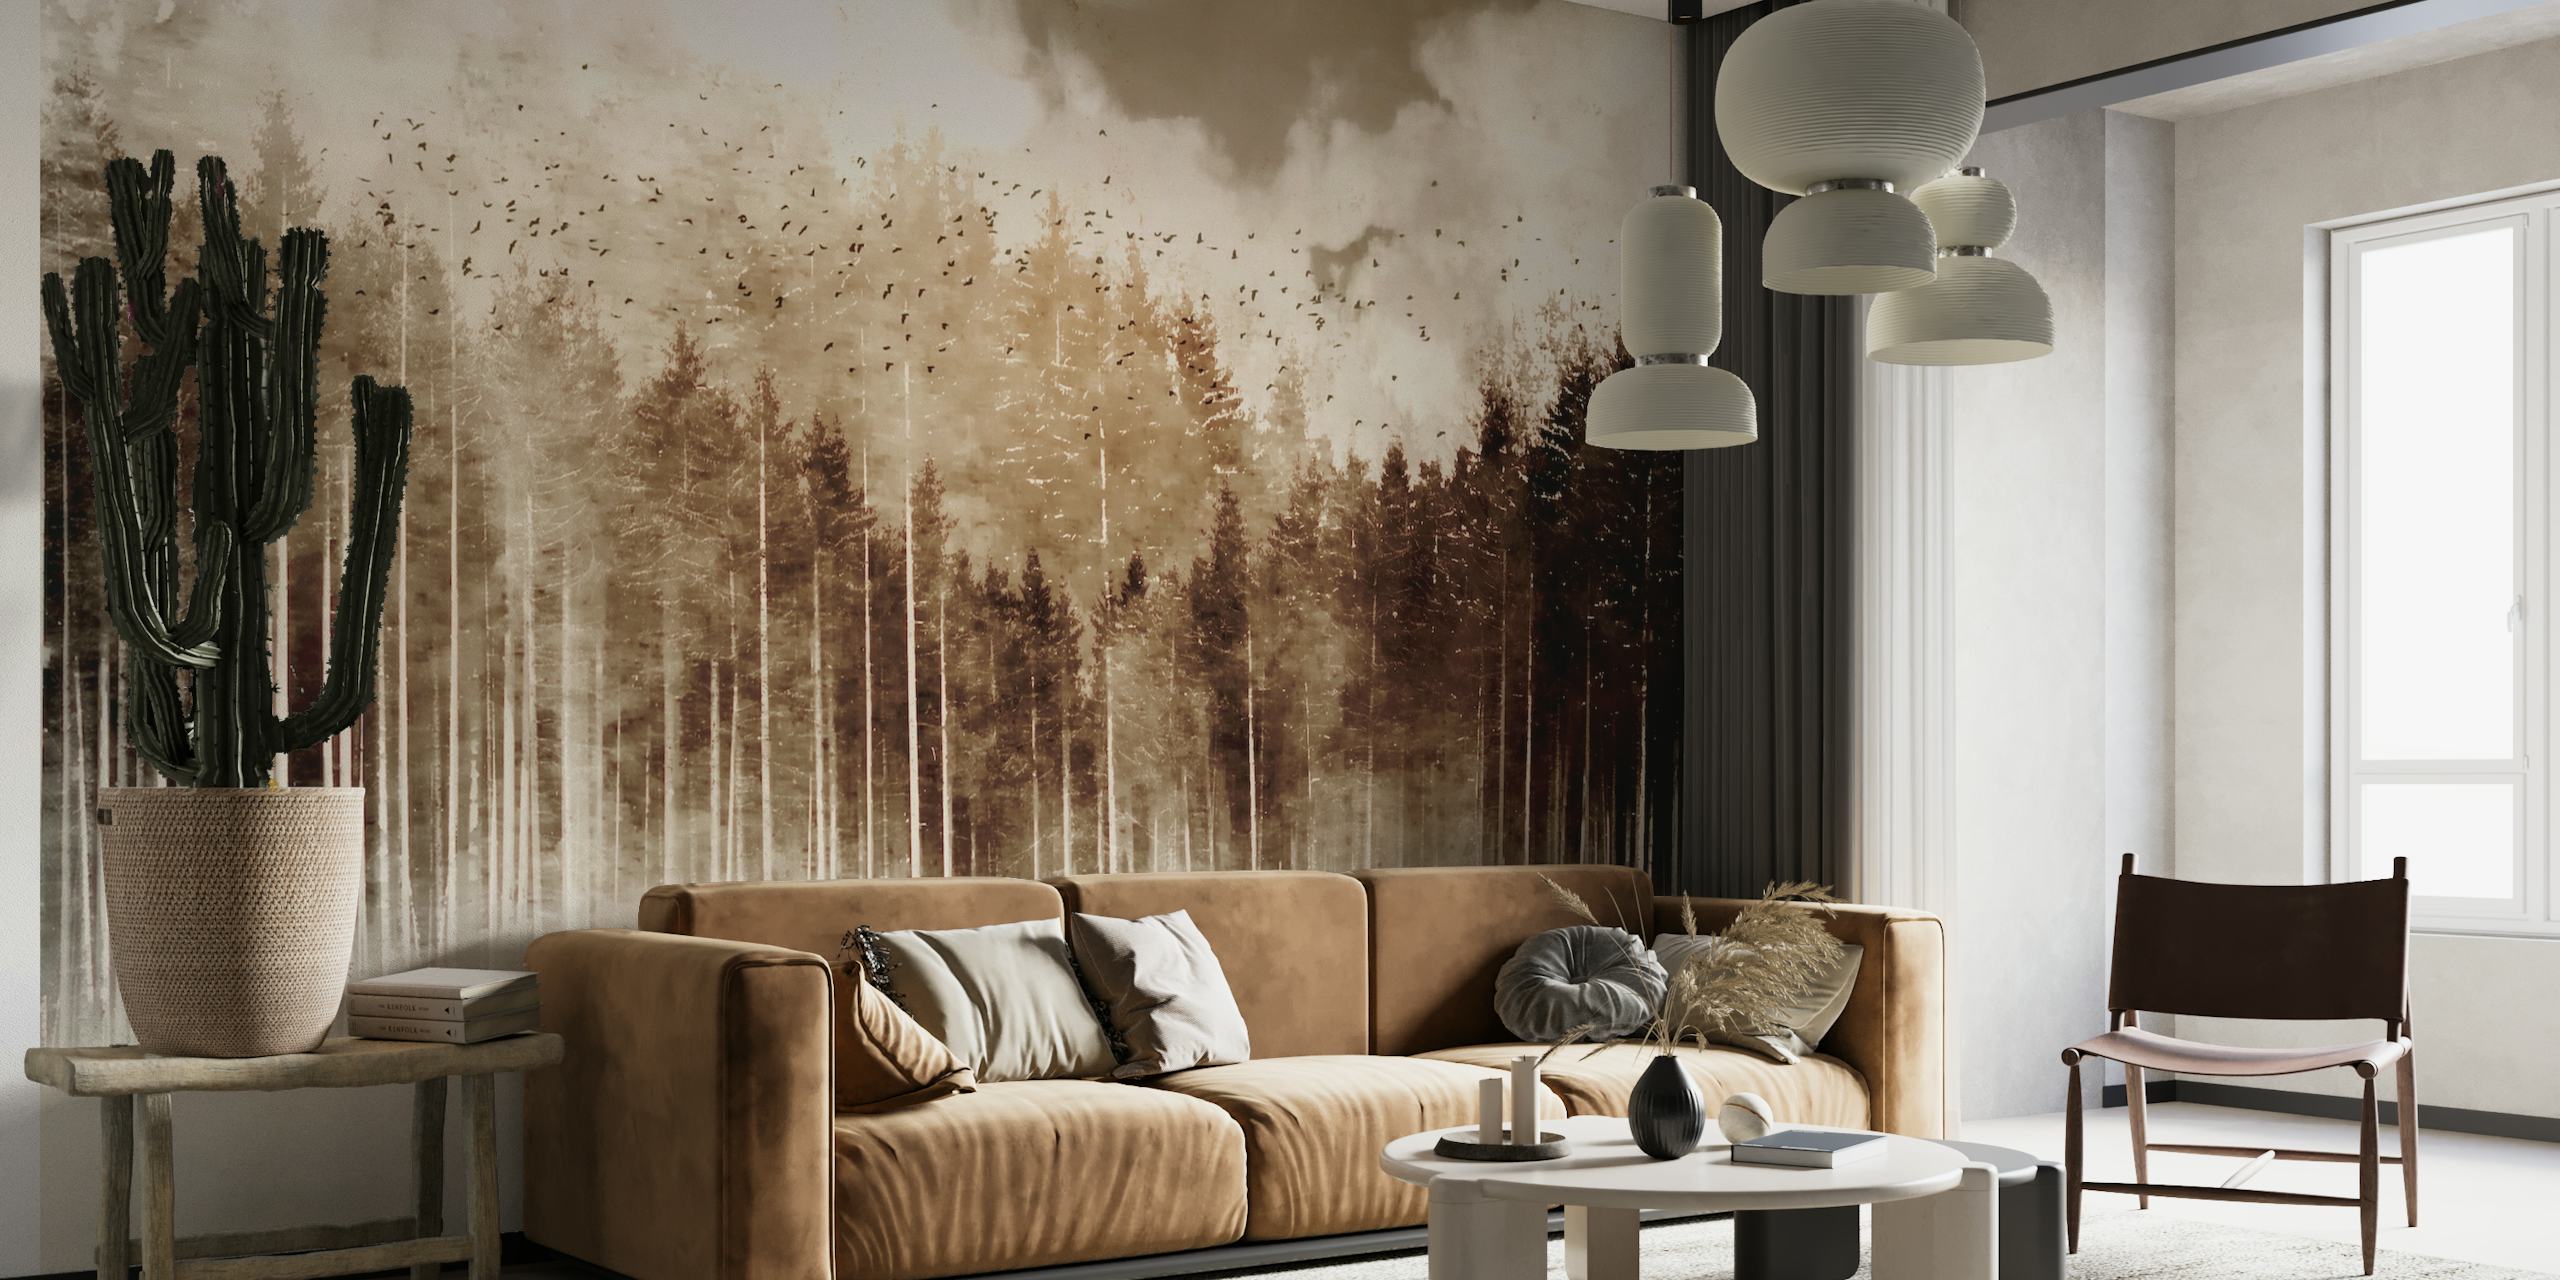 Sepia-toned mysterious forest wall mural with dense trees and mist